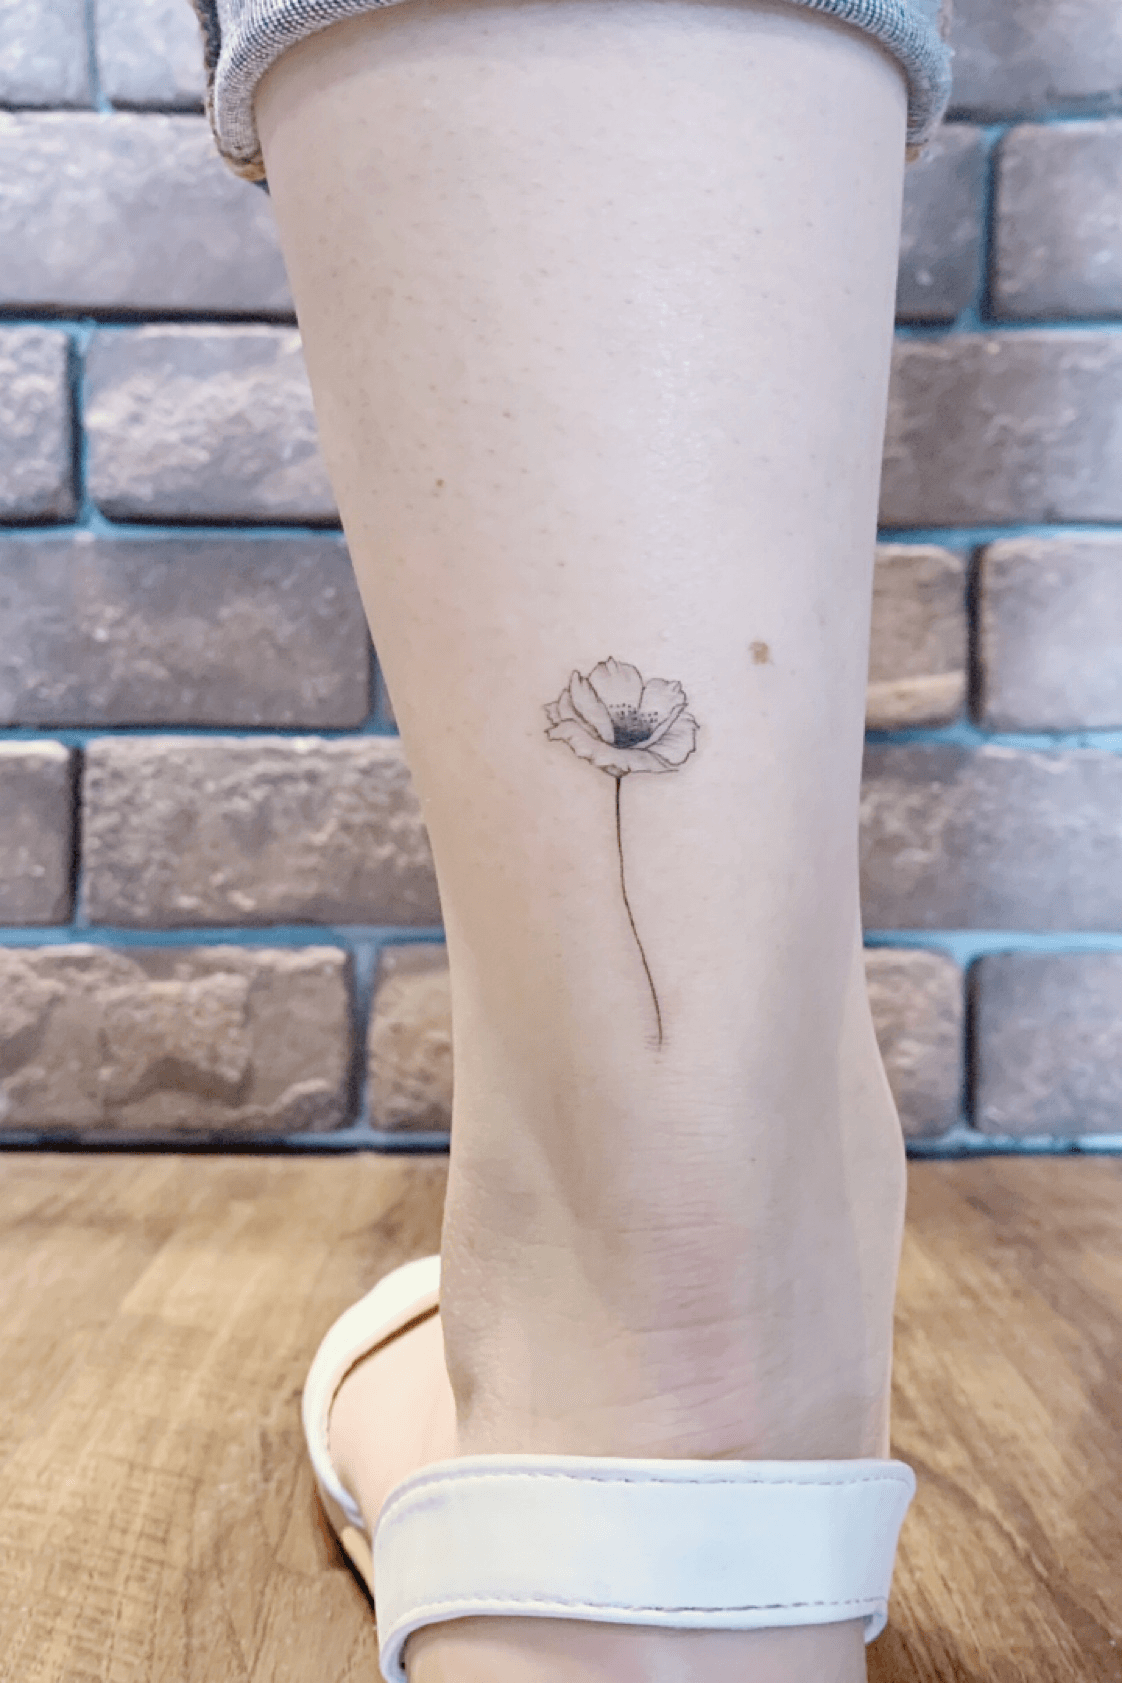 60 Beautiful Poppy Tattoo Designs and Meanings  TattooAdore